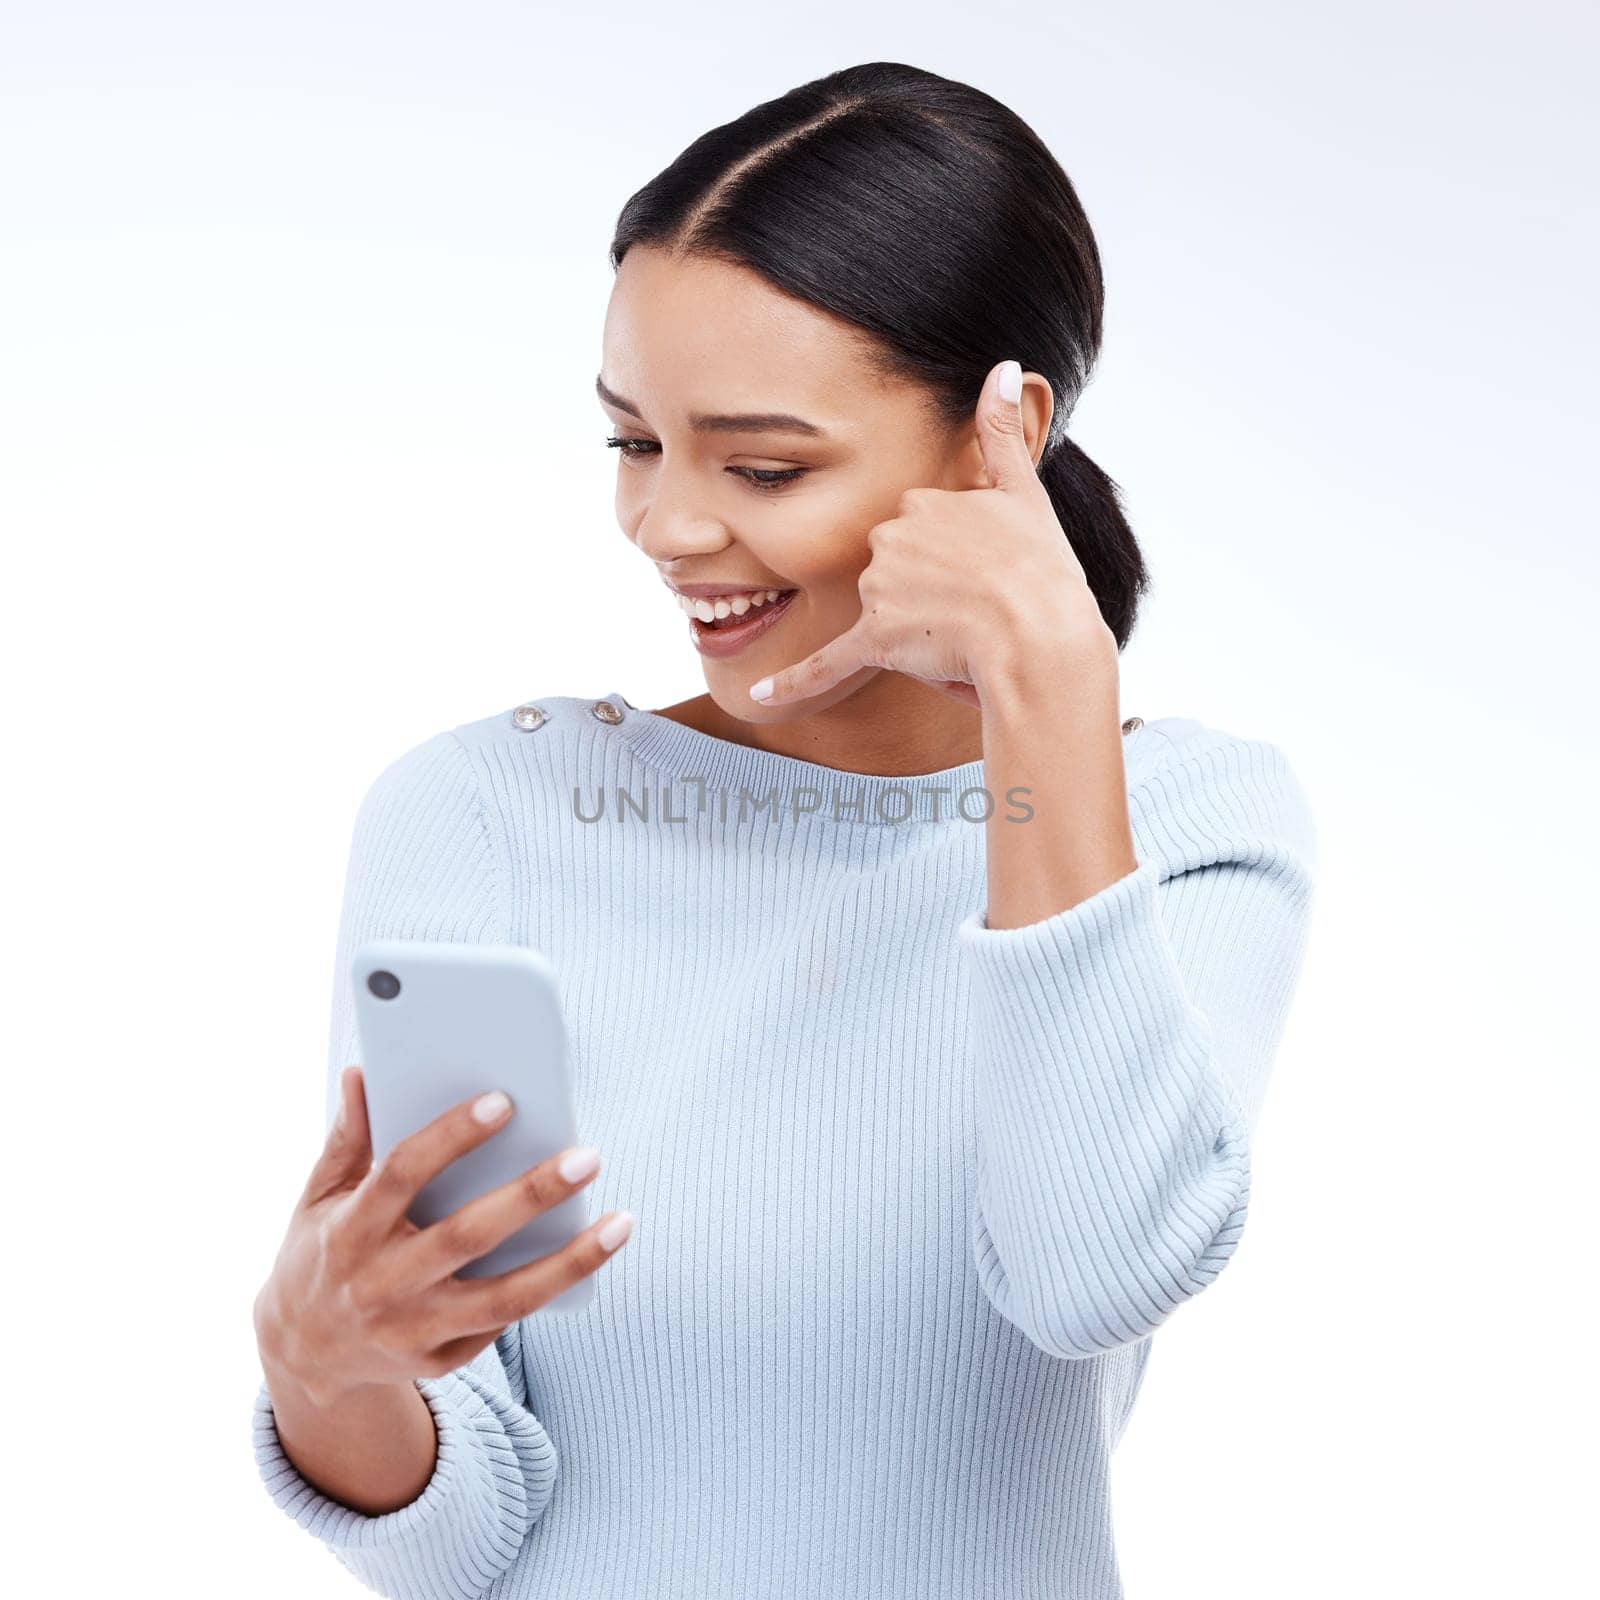 Phone call, sign and woman isolated on a white background for networking, contact and communication on mobile app. Happy young person talking, hello or conversation on cellphone service in studio.